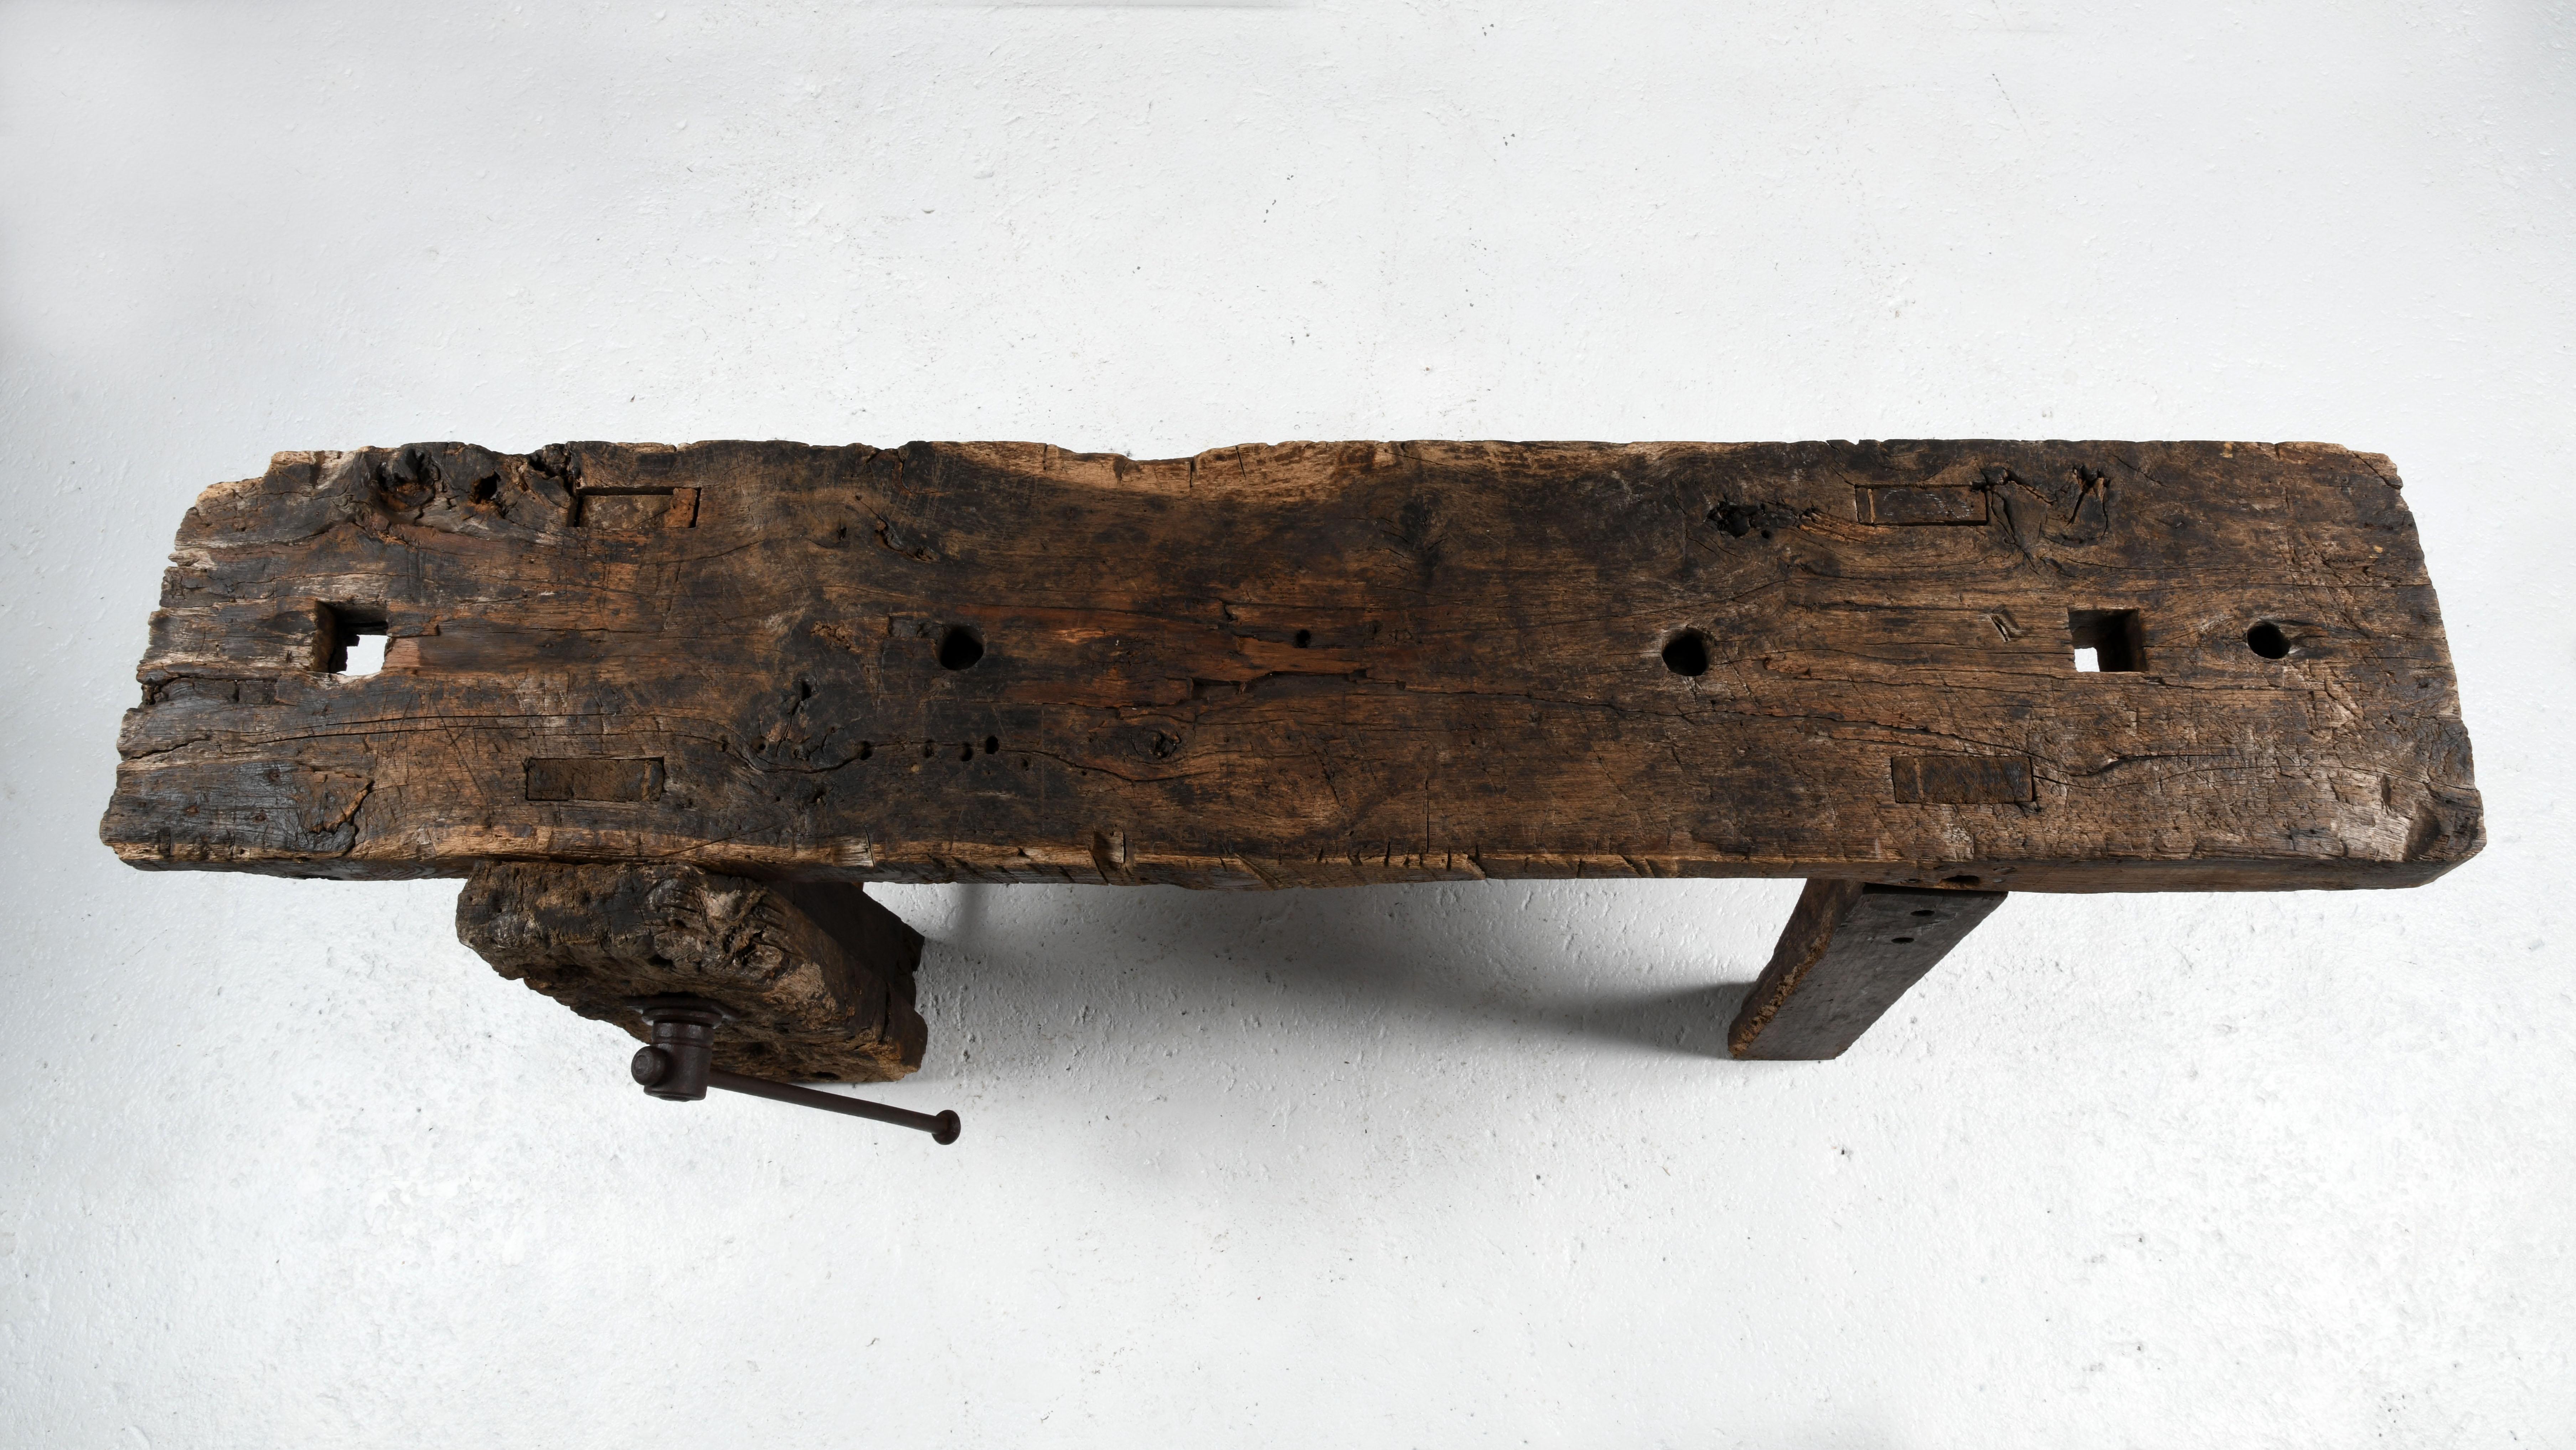 20th Century French workbench in worm-eaten oak with a superb patina of age